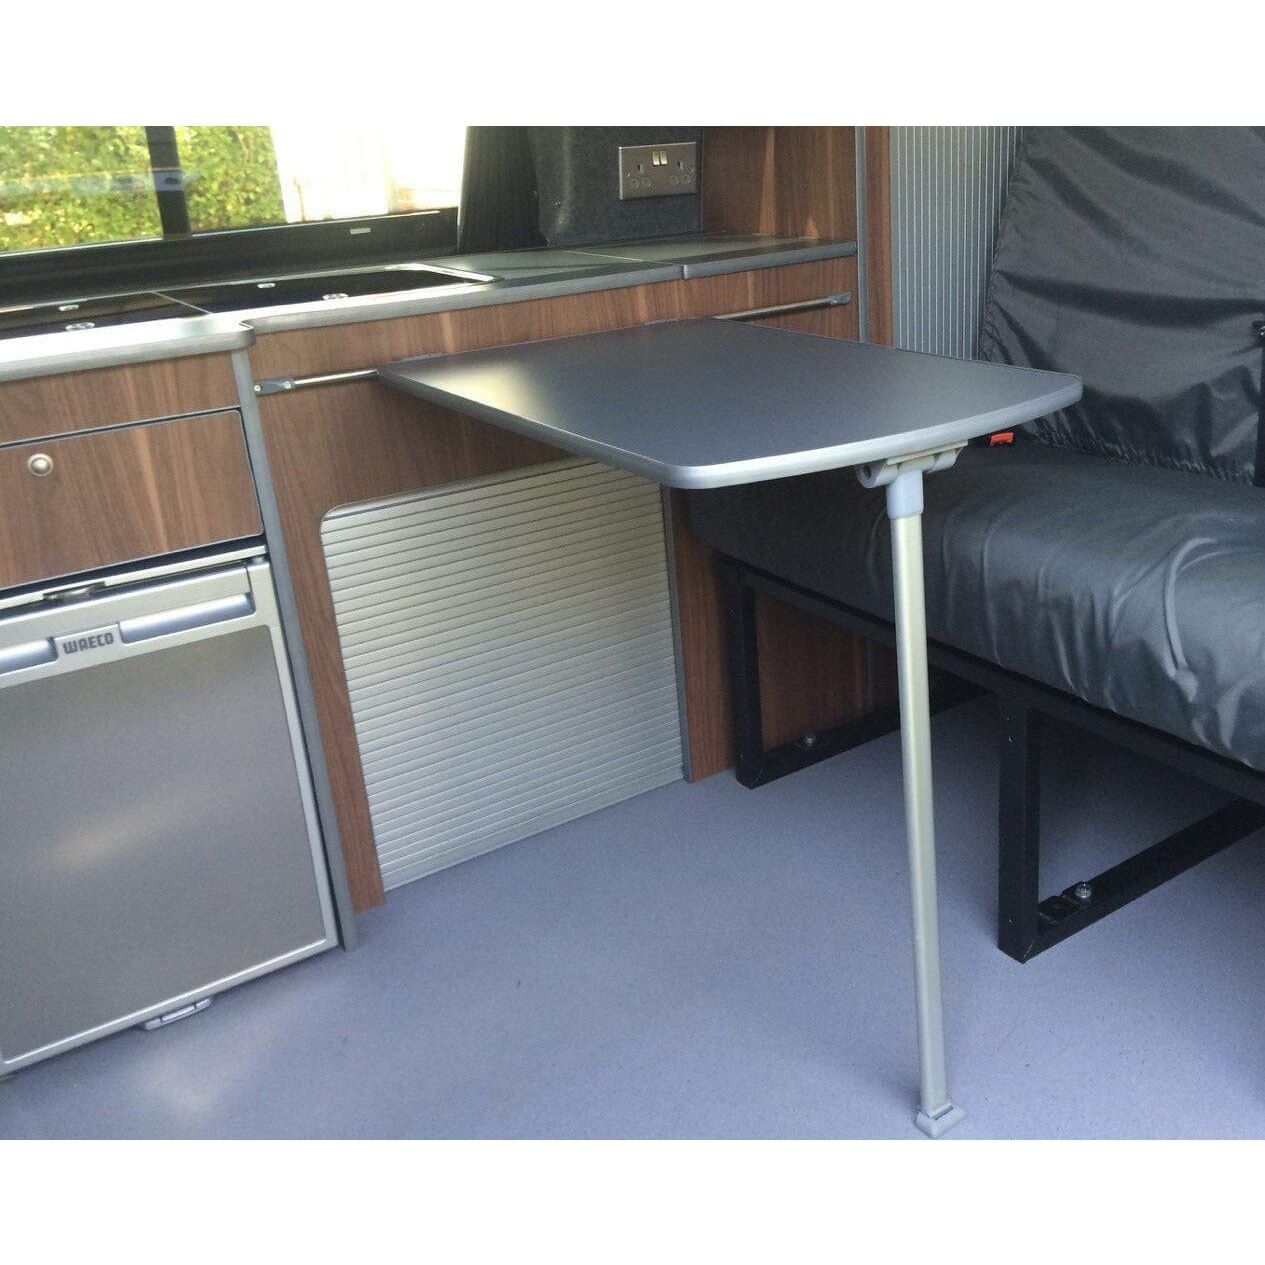 MARINE / CAMPERVAN FOLDING TABLE LEG AND Stainless & Ally RAIL